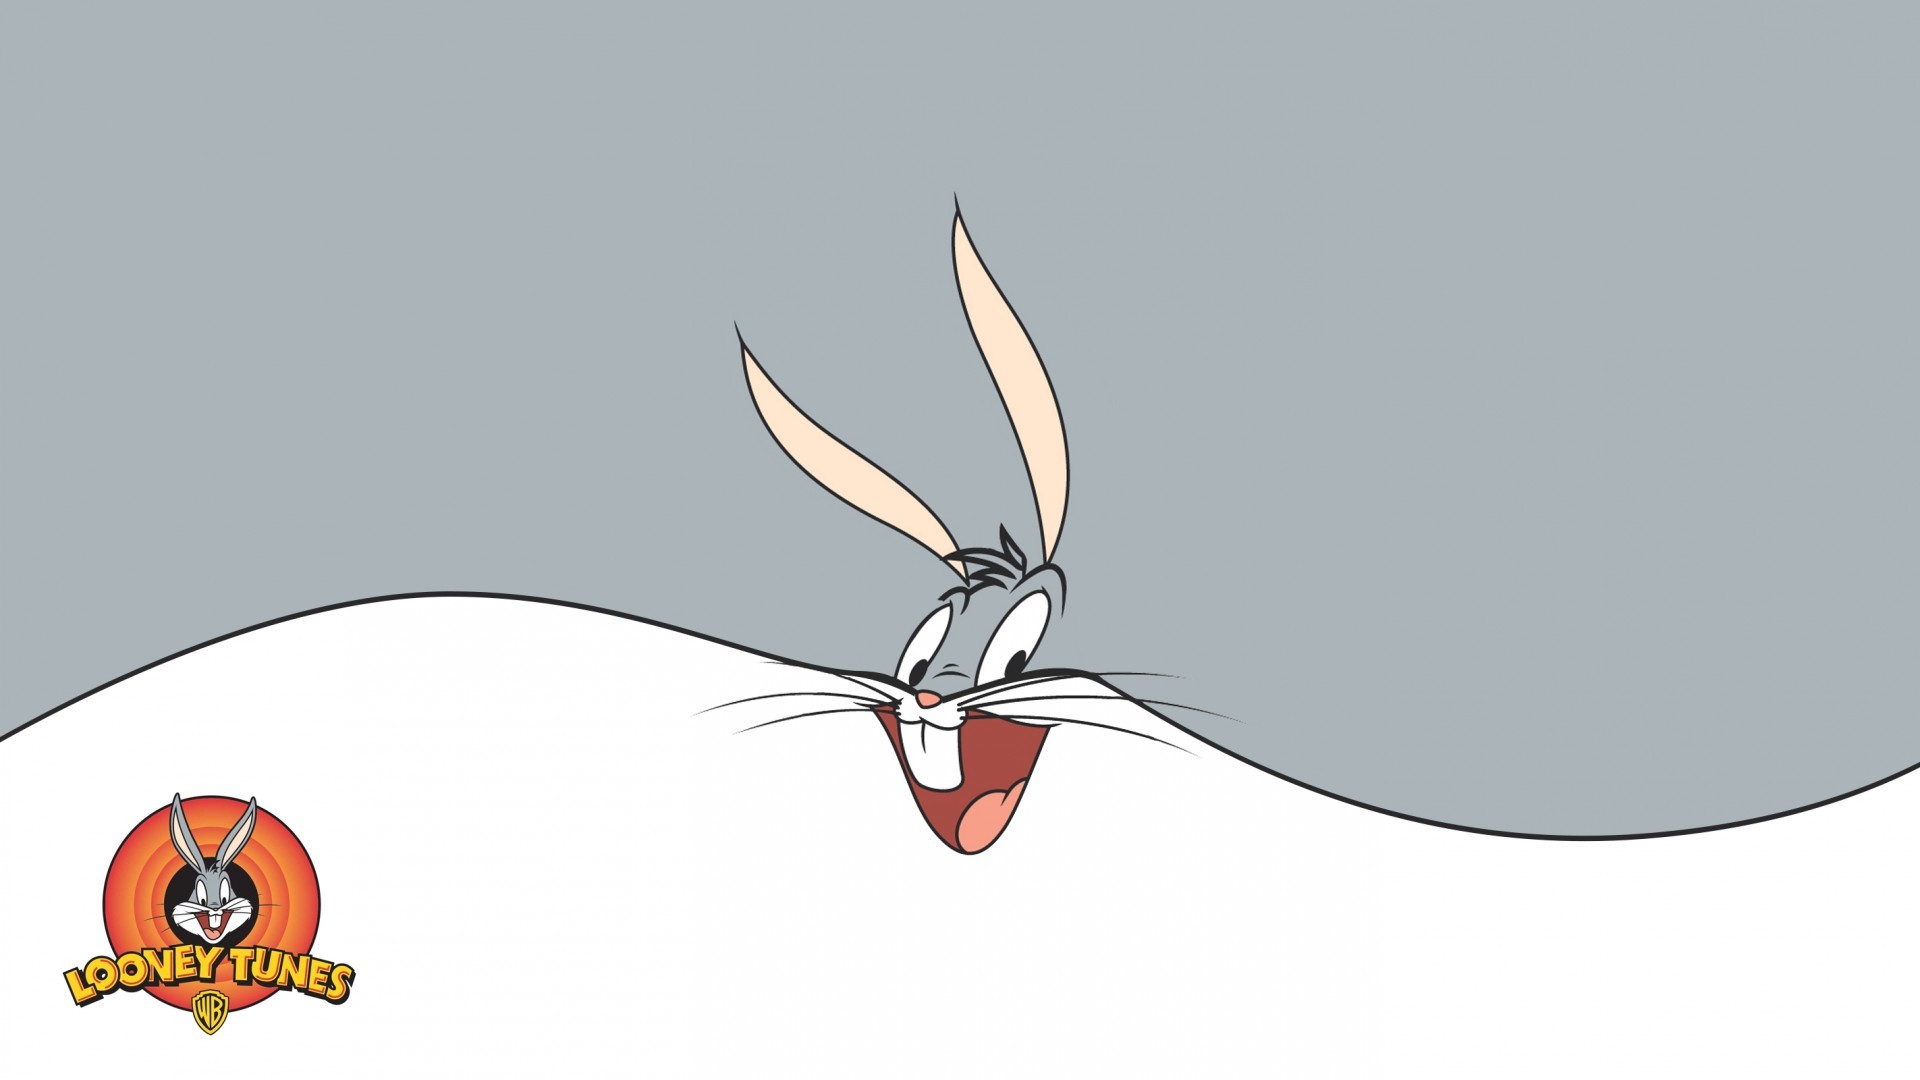 1920x1080 Bugs Bunny HD Wallpapers Free Background 1920Ã1080 Bugs Bunny Wallpapers  (45 Wallpapers)